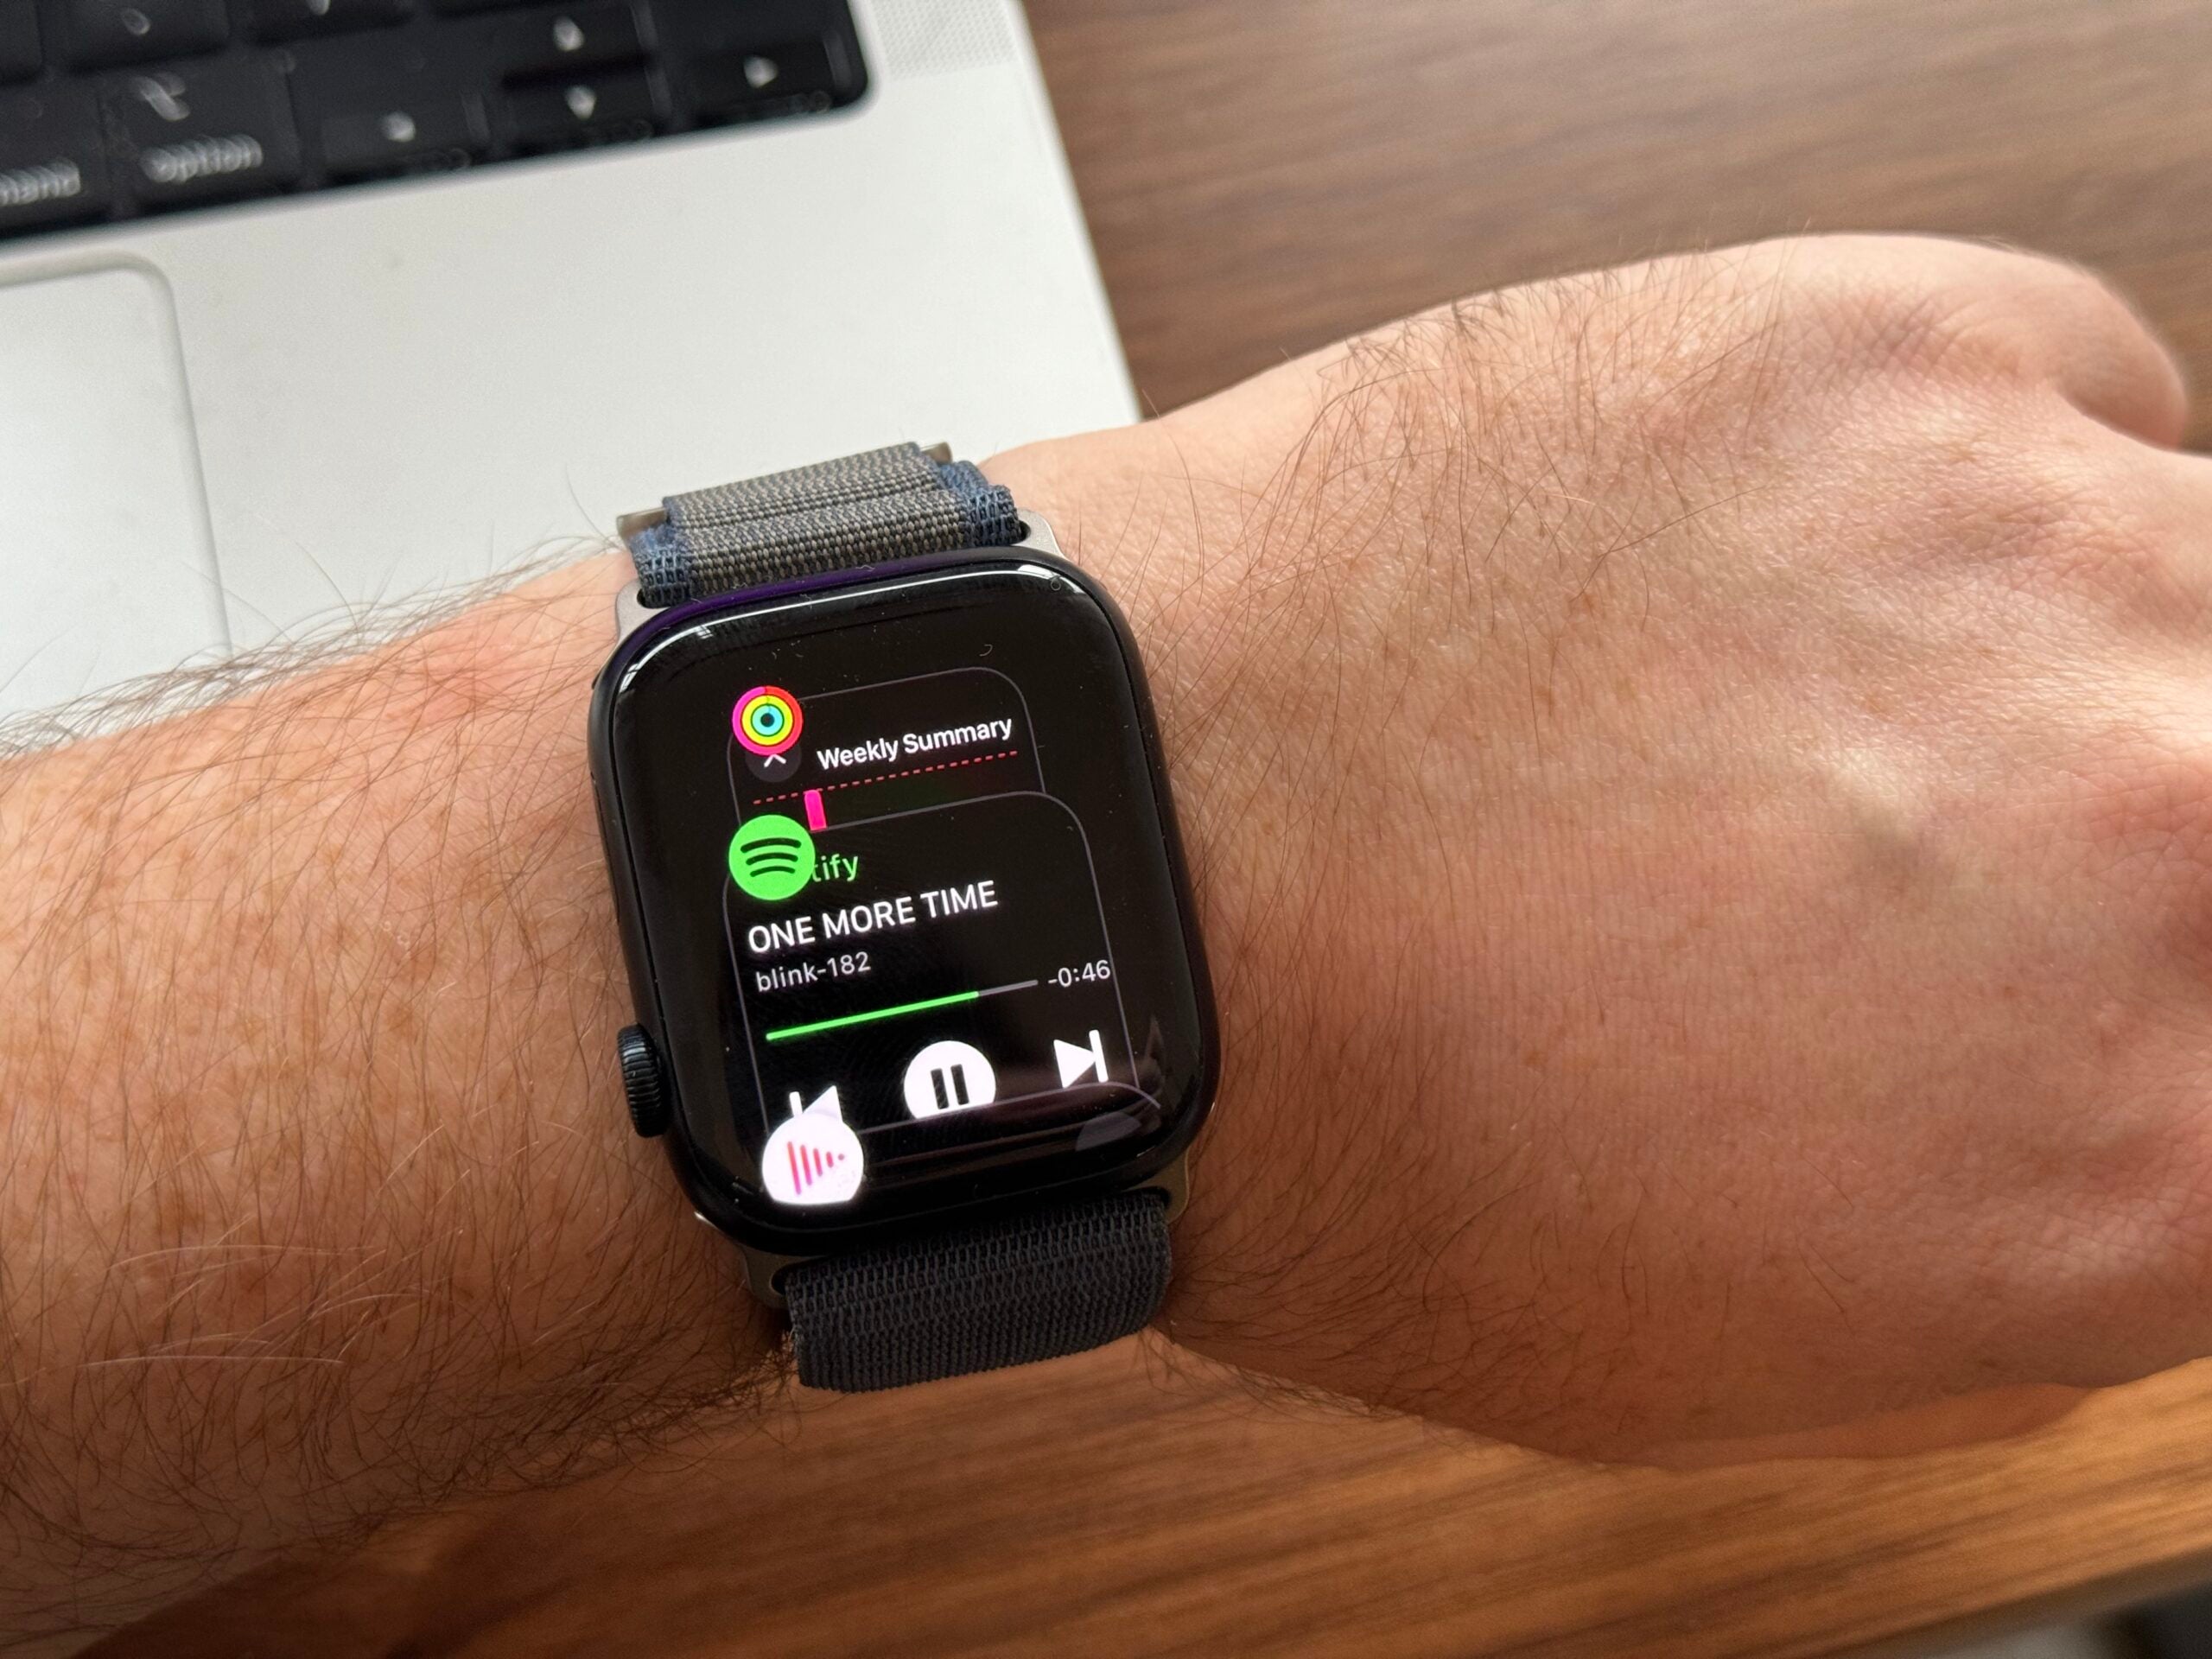 force quitting apps on the apple watch